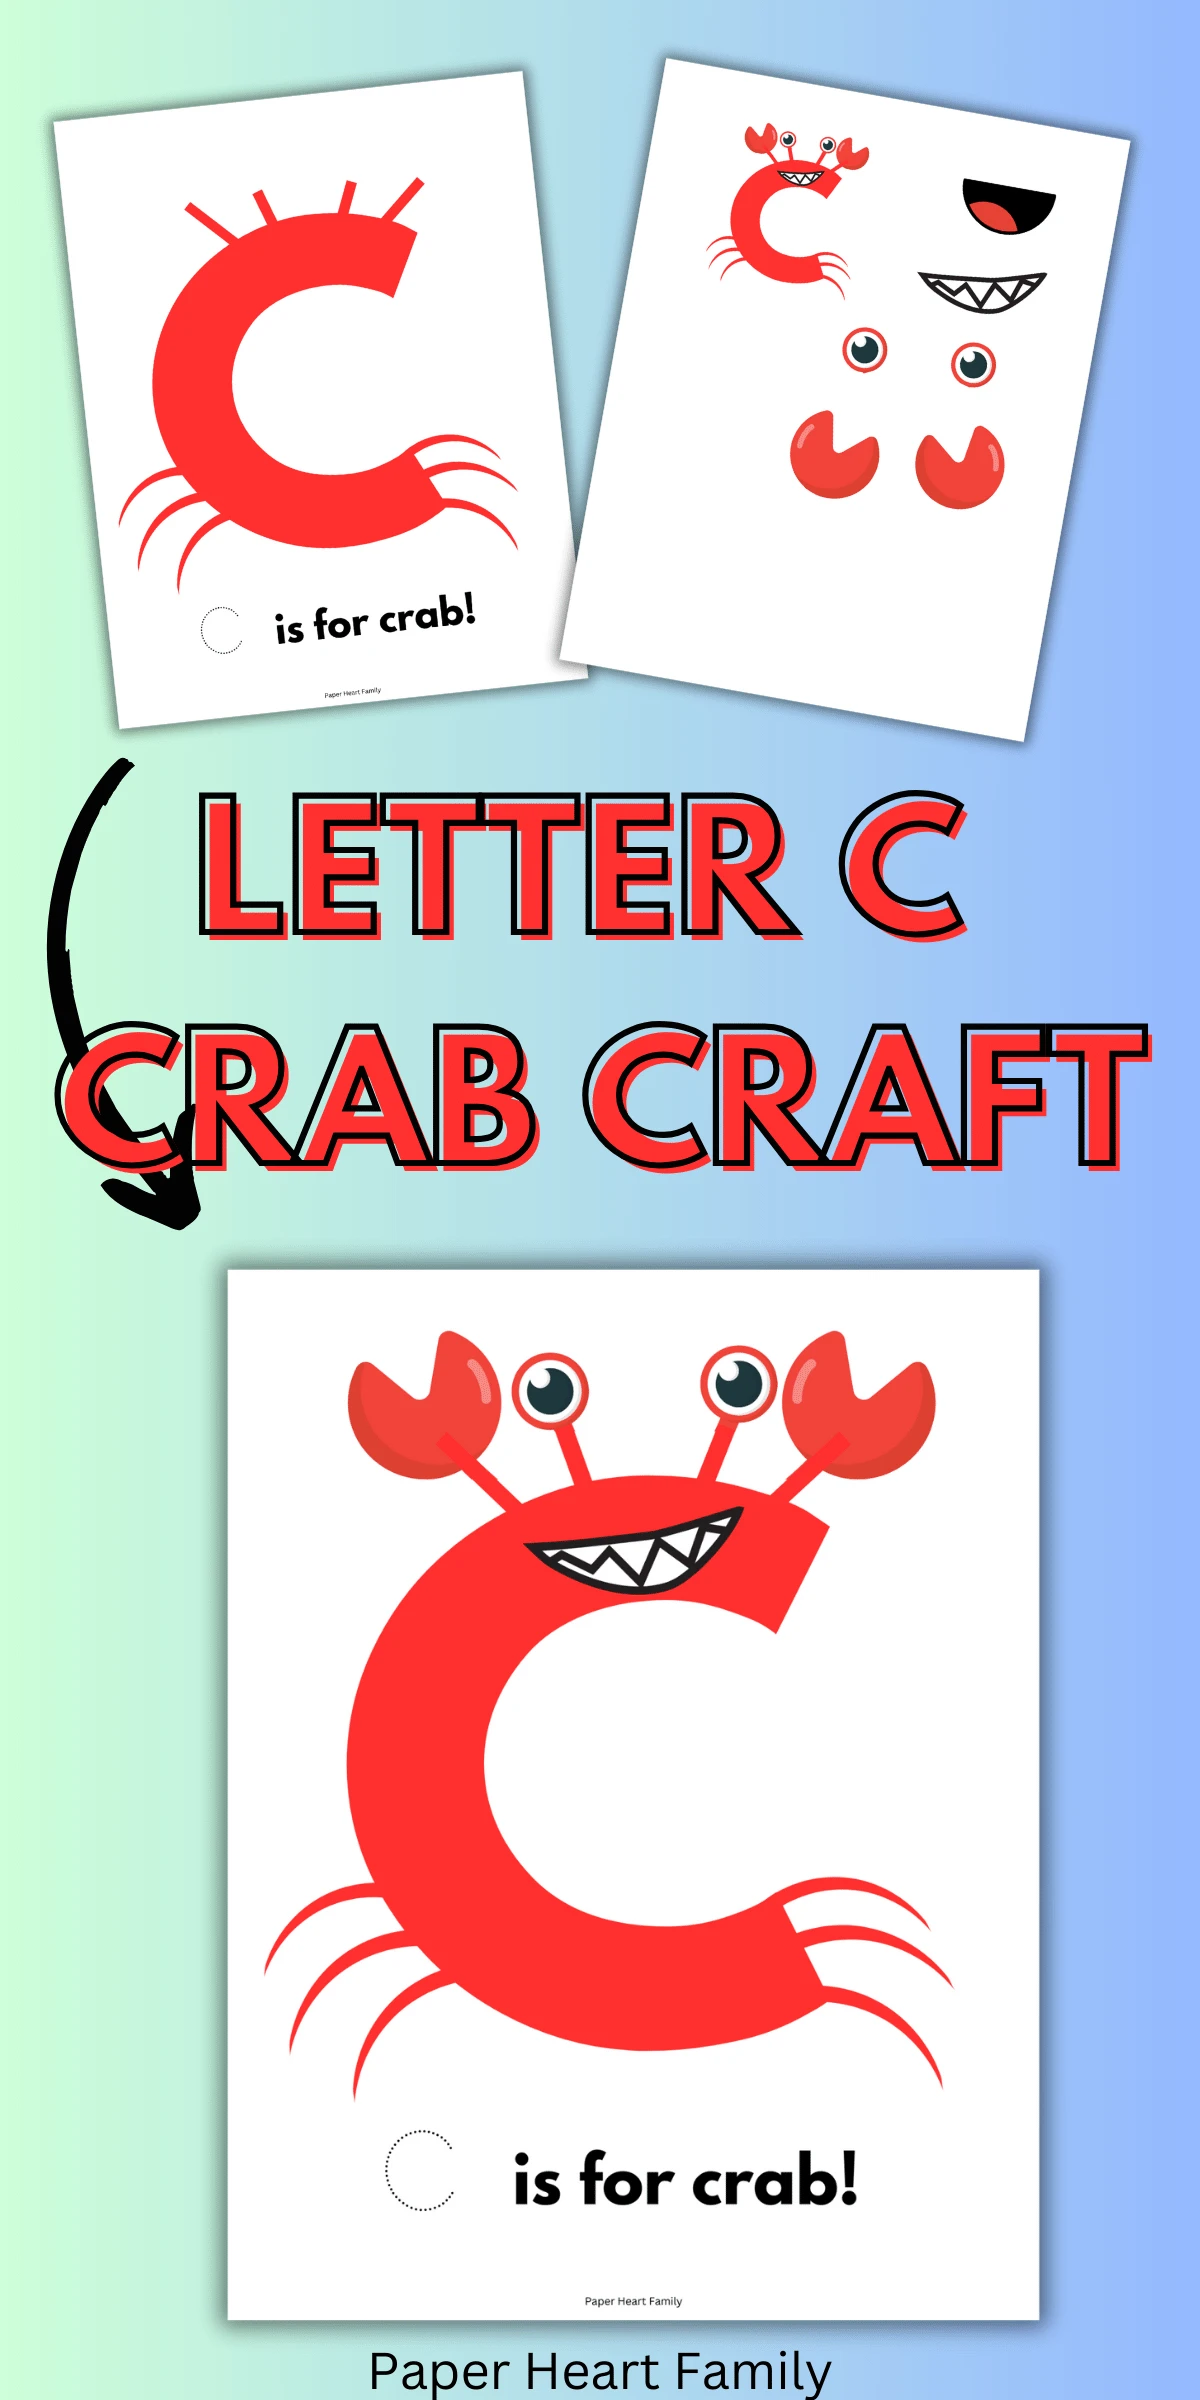 Crab craft with cut and paste pinchers, eyes and mouth.